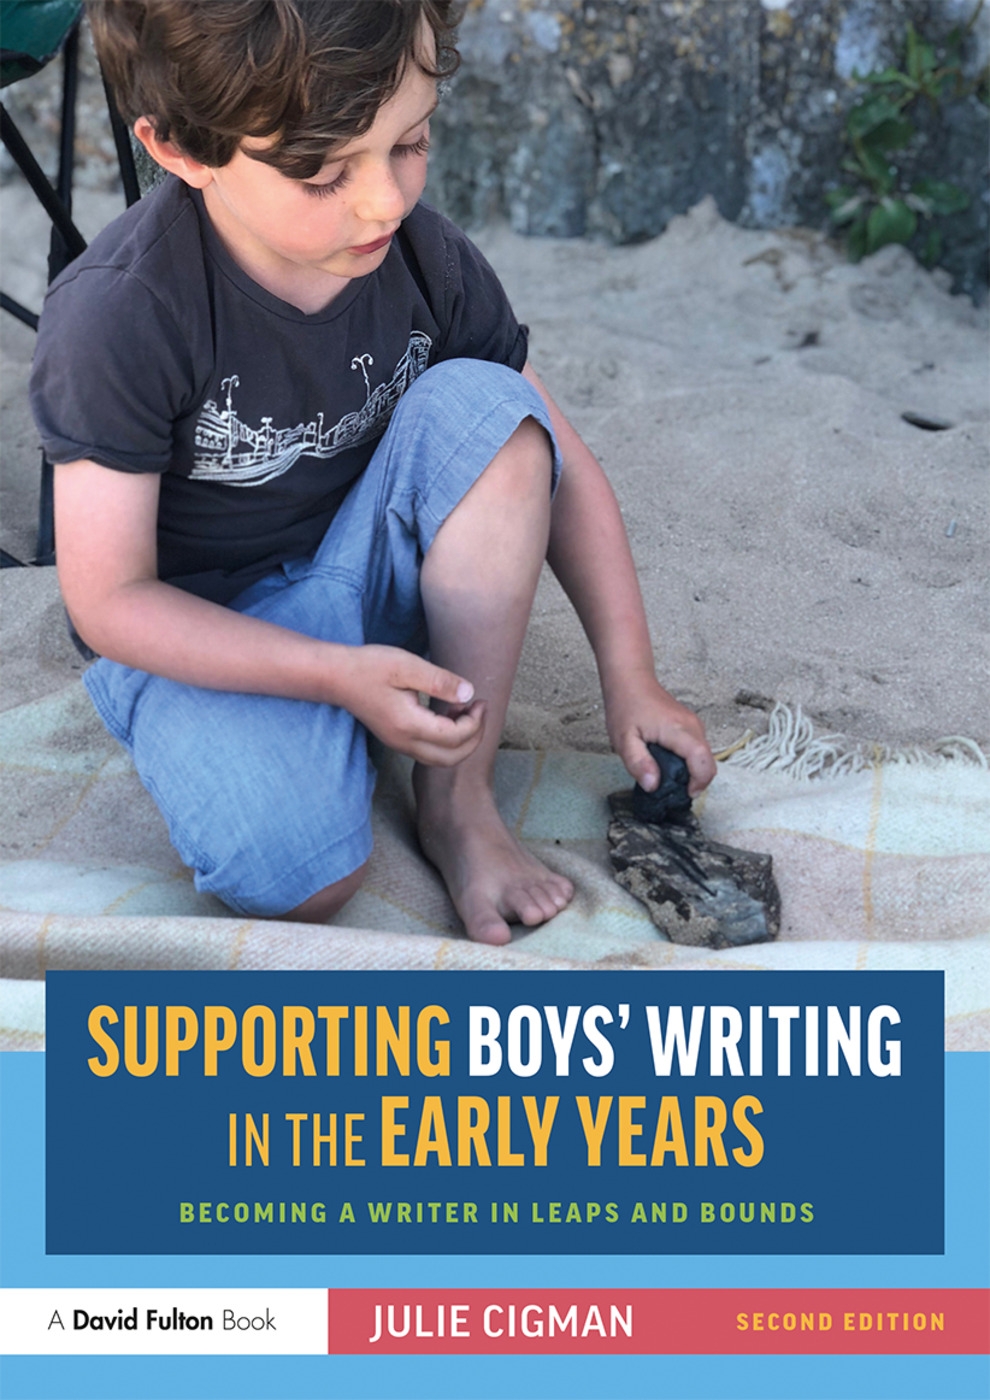 Supporting Boys’ Writing in the Early Years: Becoming a Writer in Leaps and Bounds